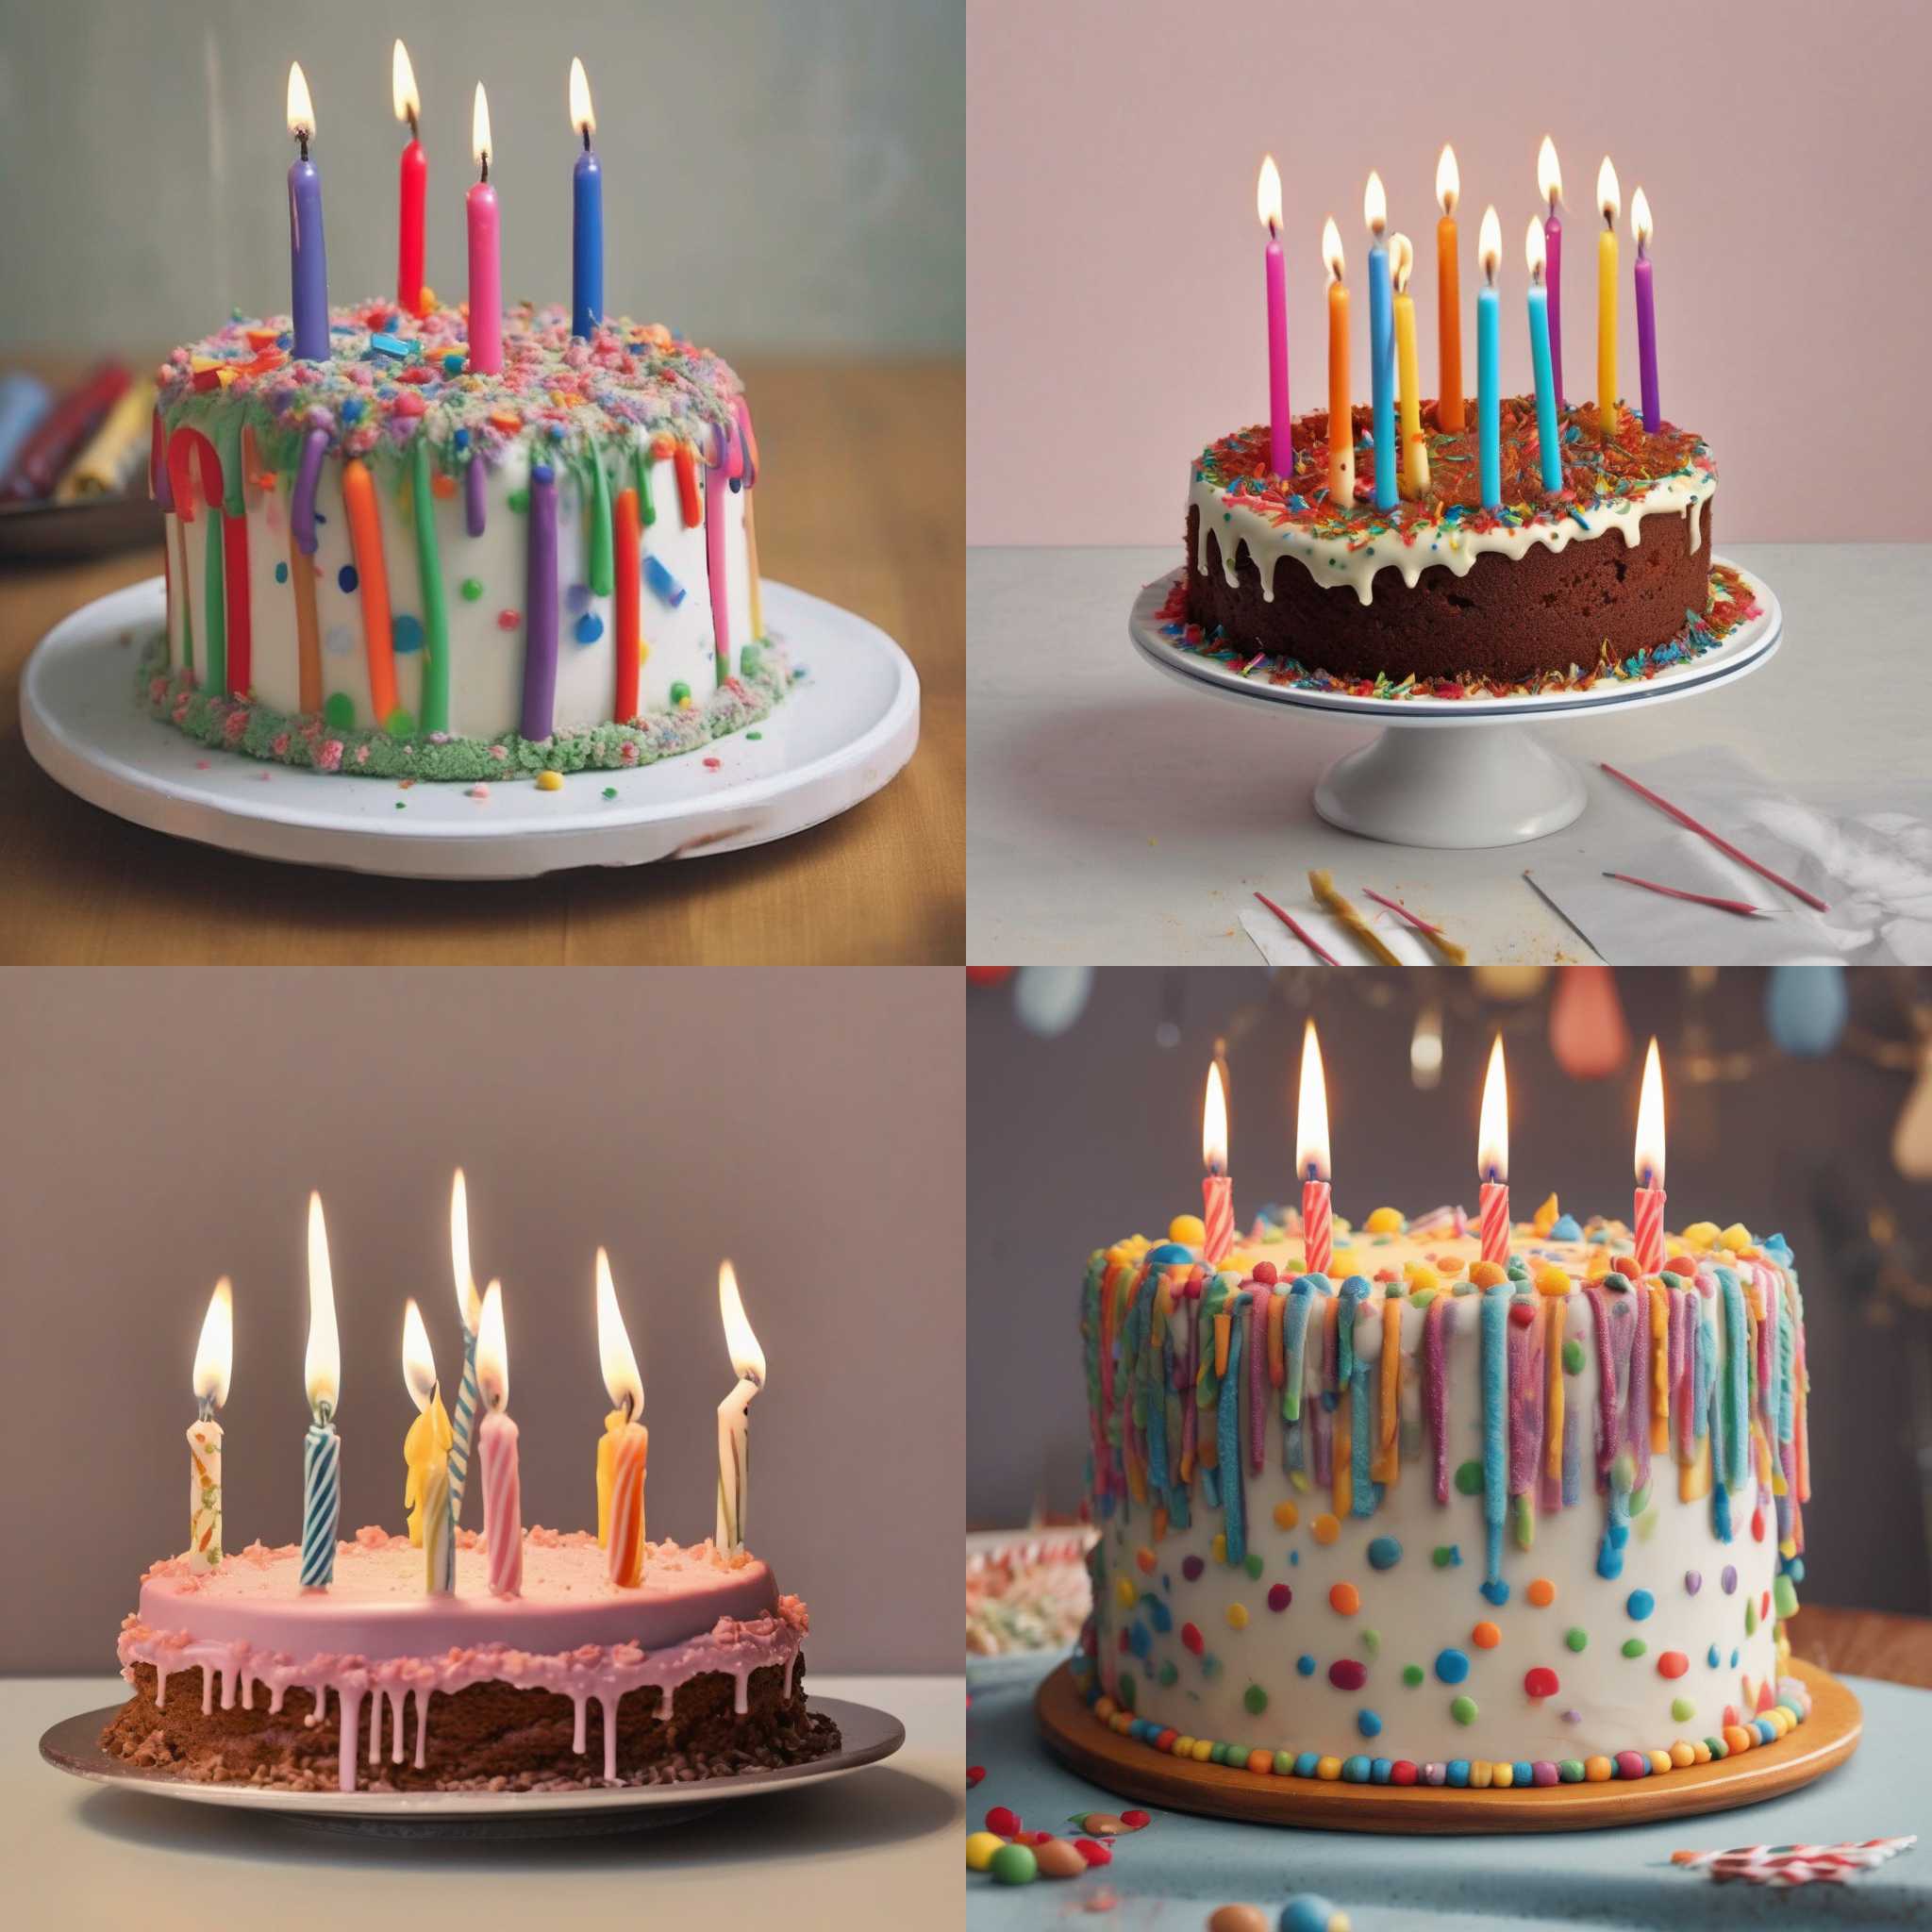 A ten-year-old kid's birthday cake with taper candles